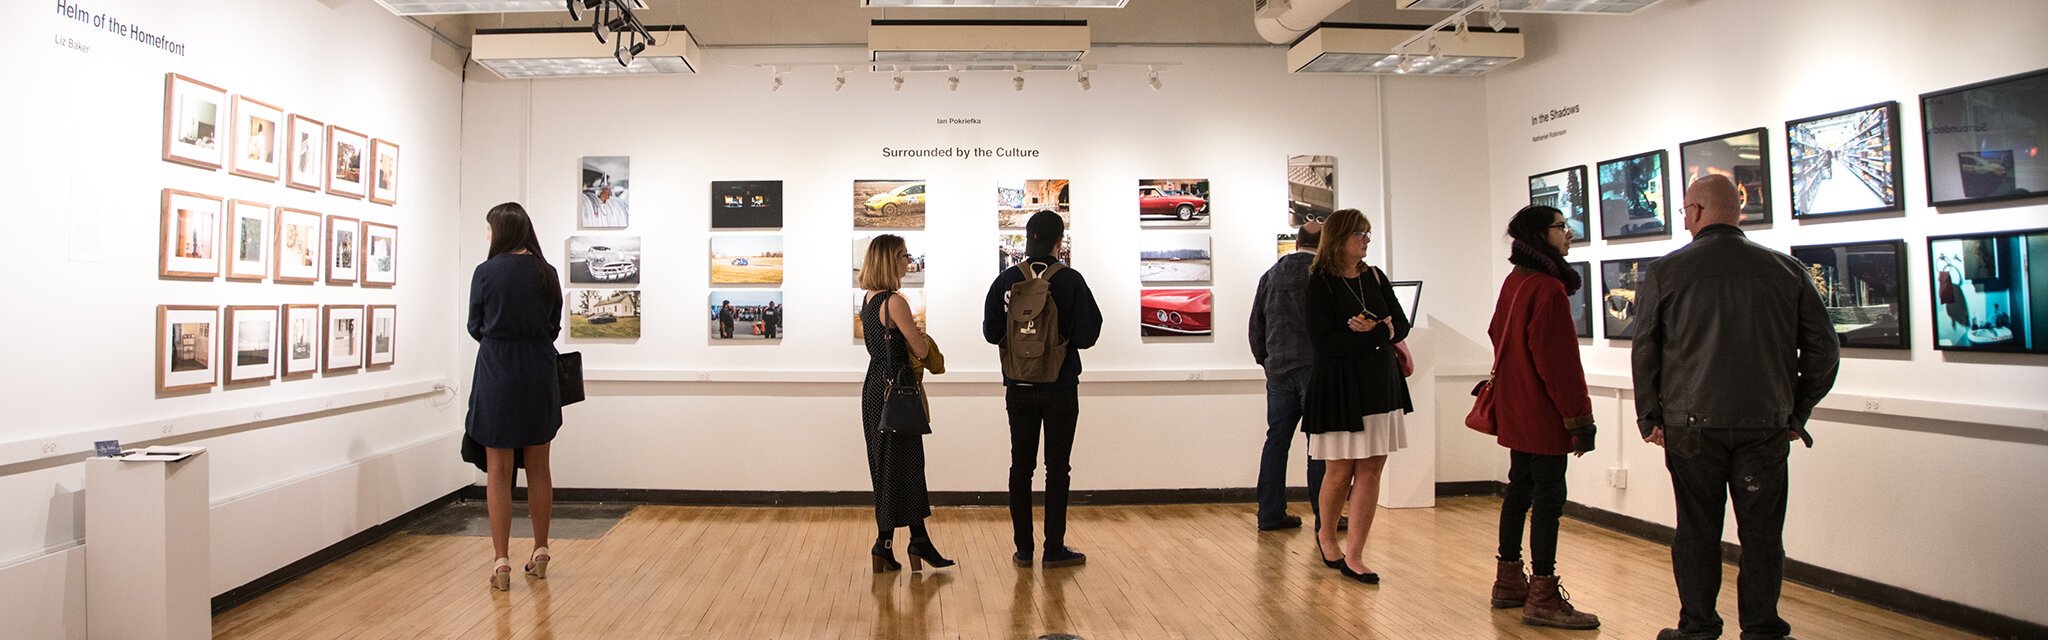 Viewers exploring the Annual Student Exhibition at Kendall College of Art and Design